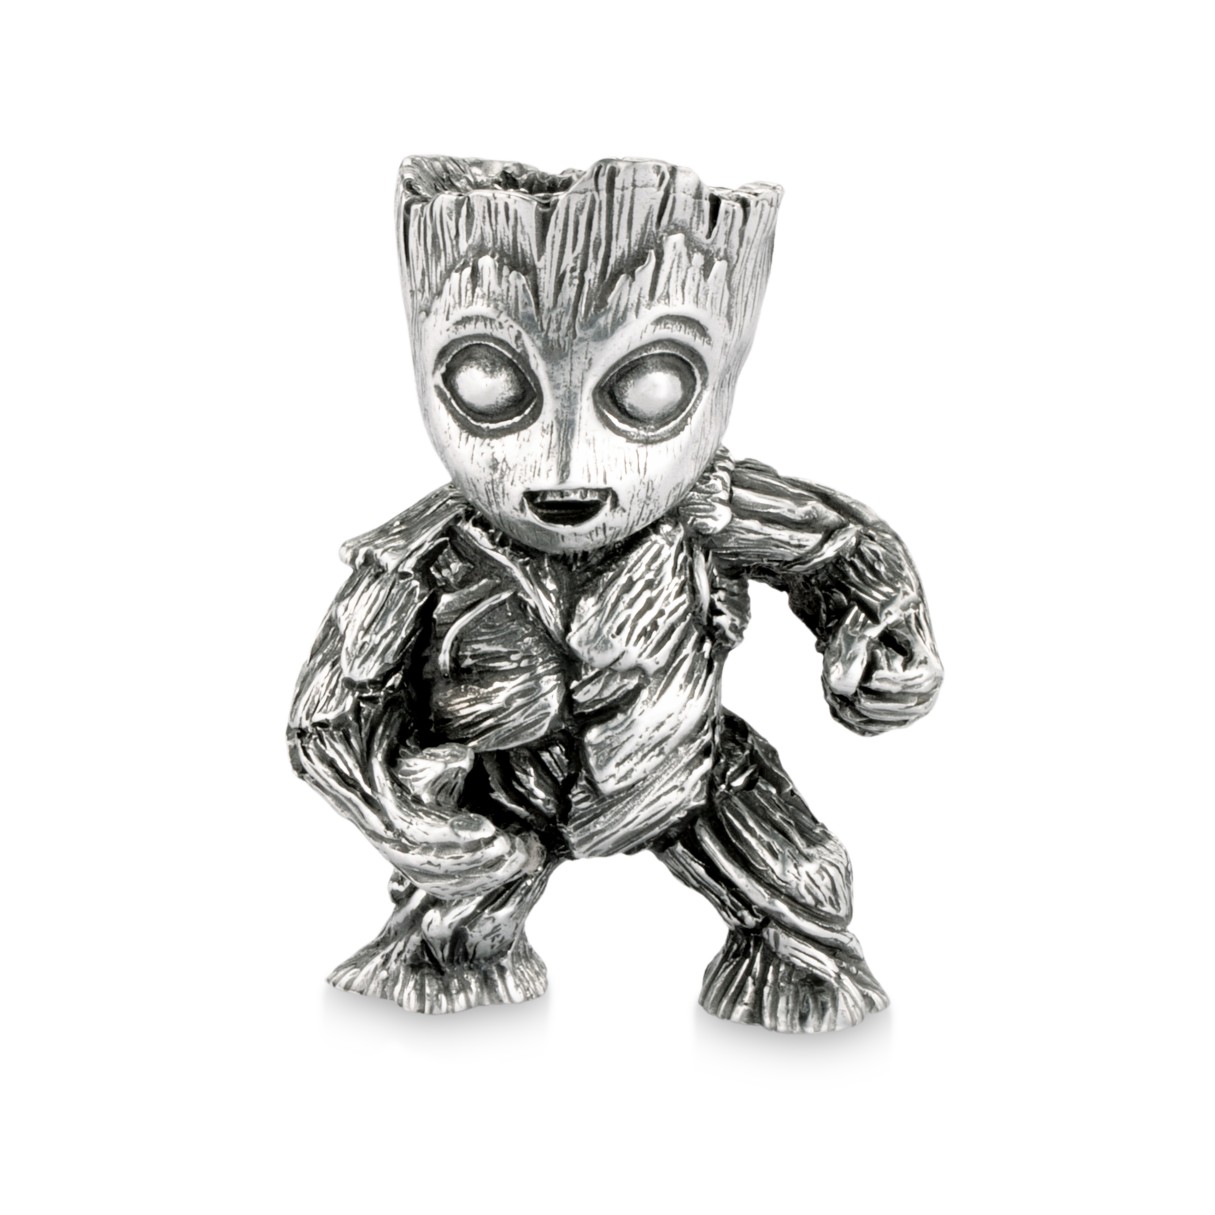 Baby Groot Pewter Mini Figurine by Royal Selangor – Guardians of the Galaxy  Vol. 2, Marvel